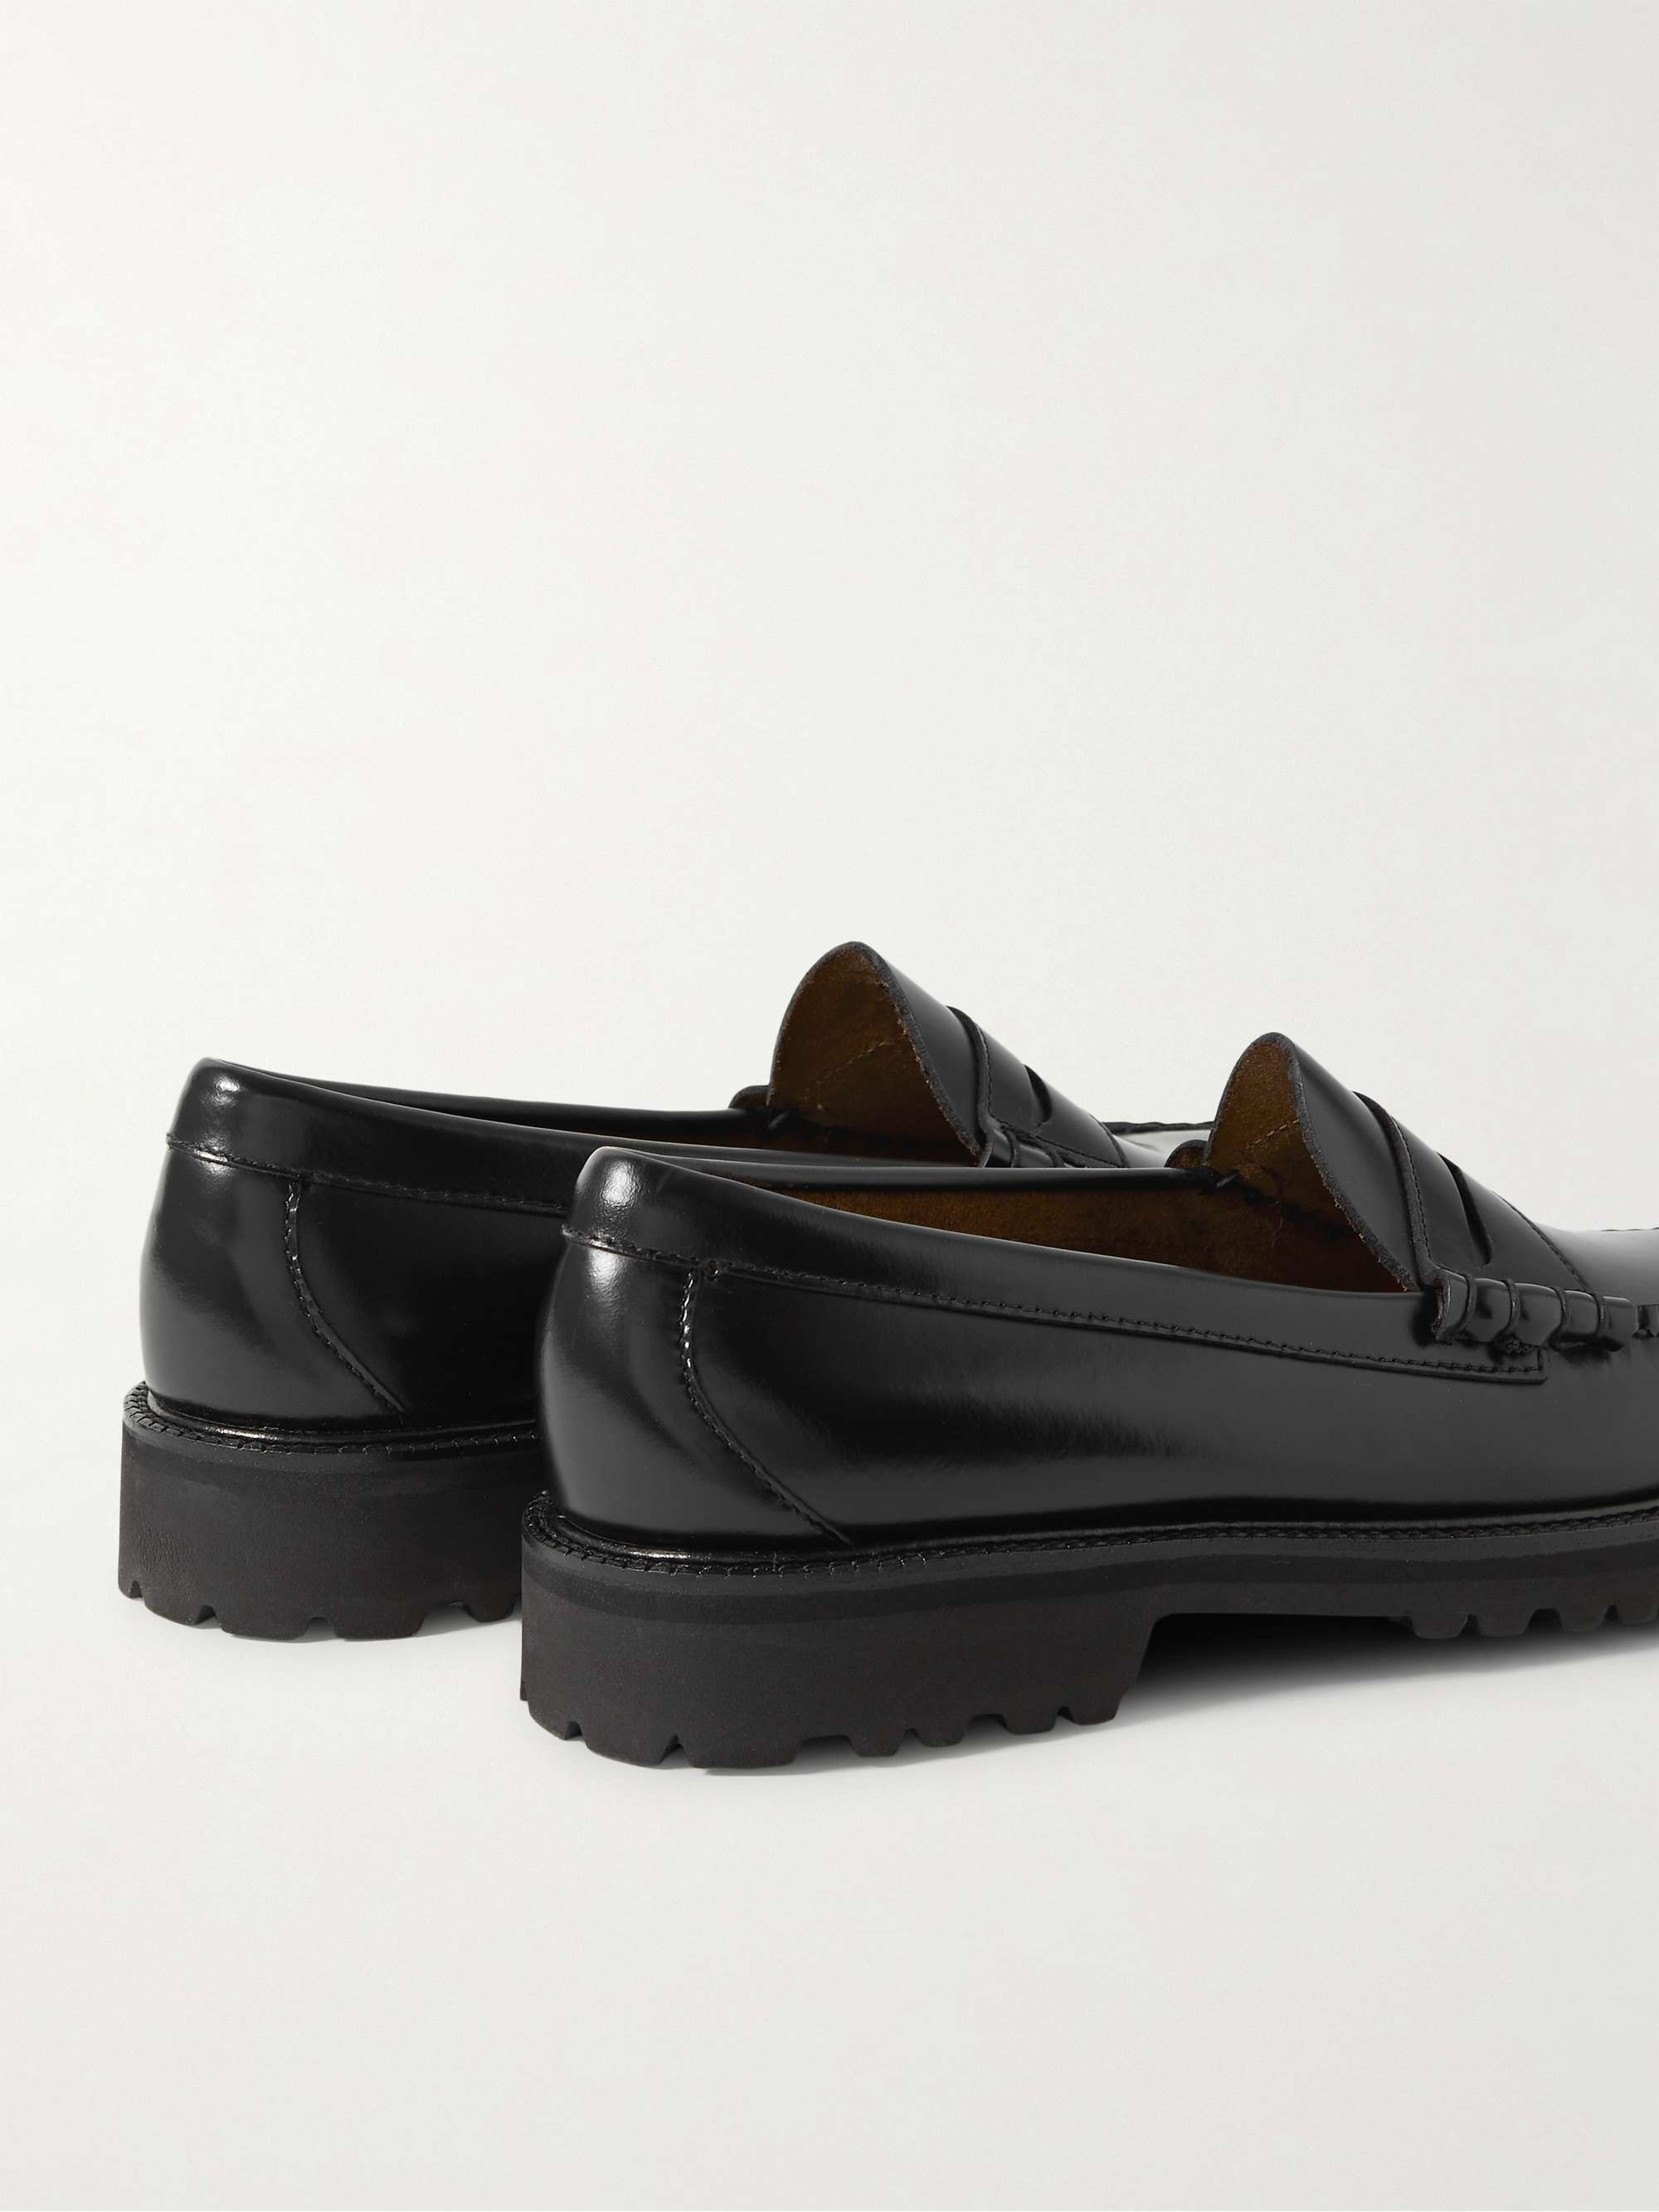 G.H. BASS Weejuns 90 Larson Leather Penny Loafers for Men | MR